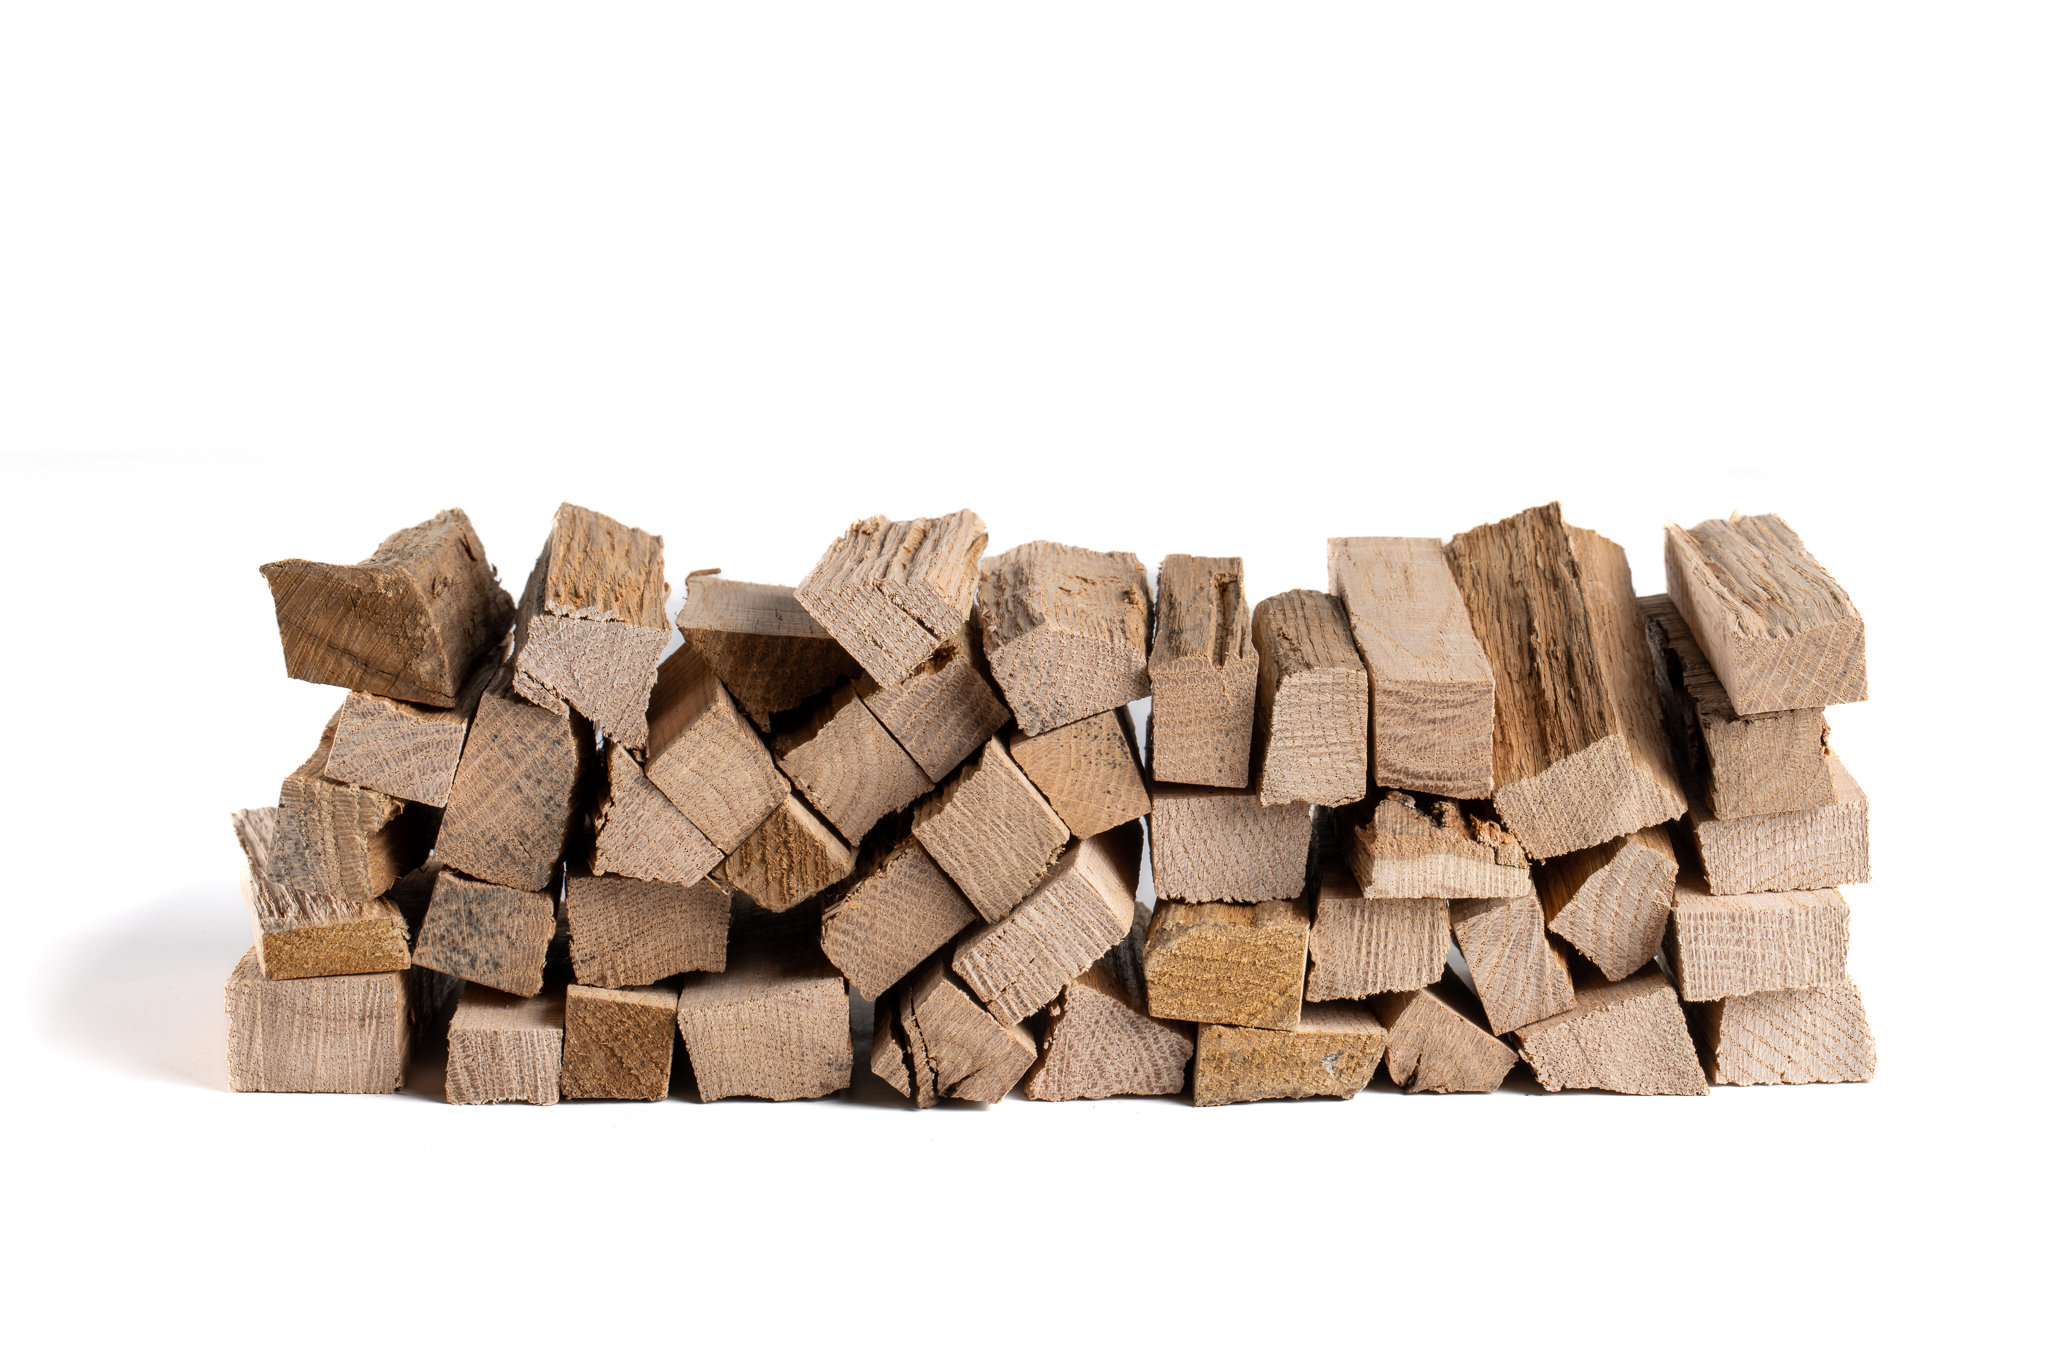 All-Natural Wood Chips - WNY Services LLC